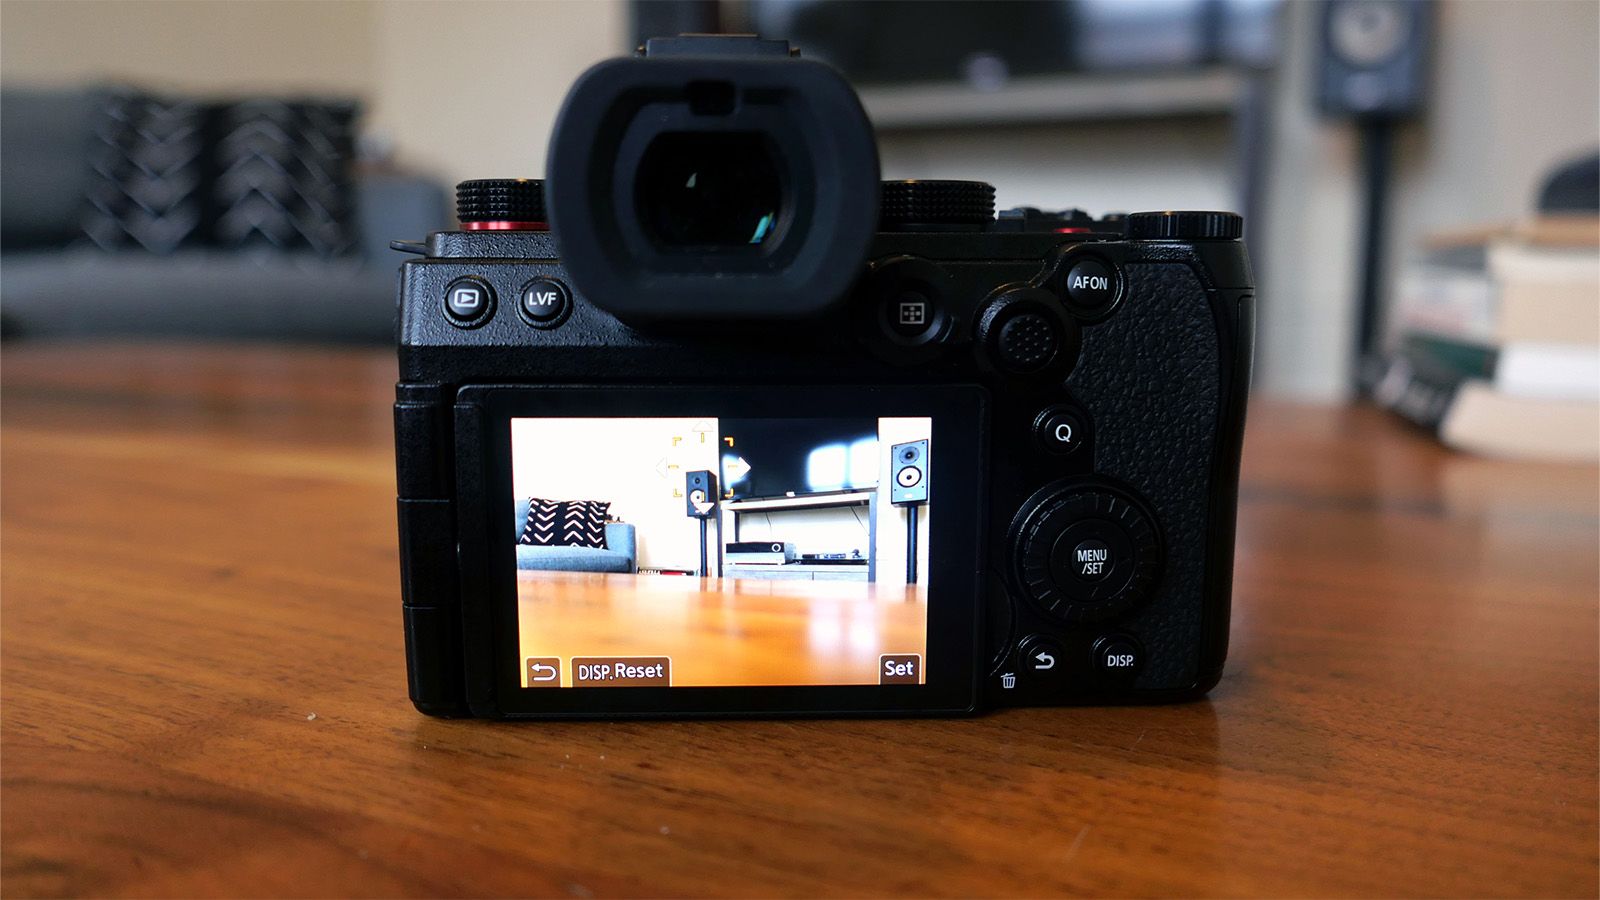 Panasonic LUMIX S5 II Review - Finally With a Very Capable